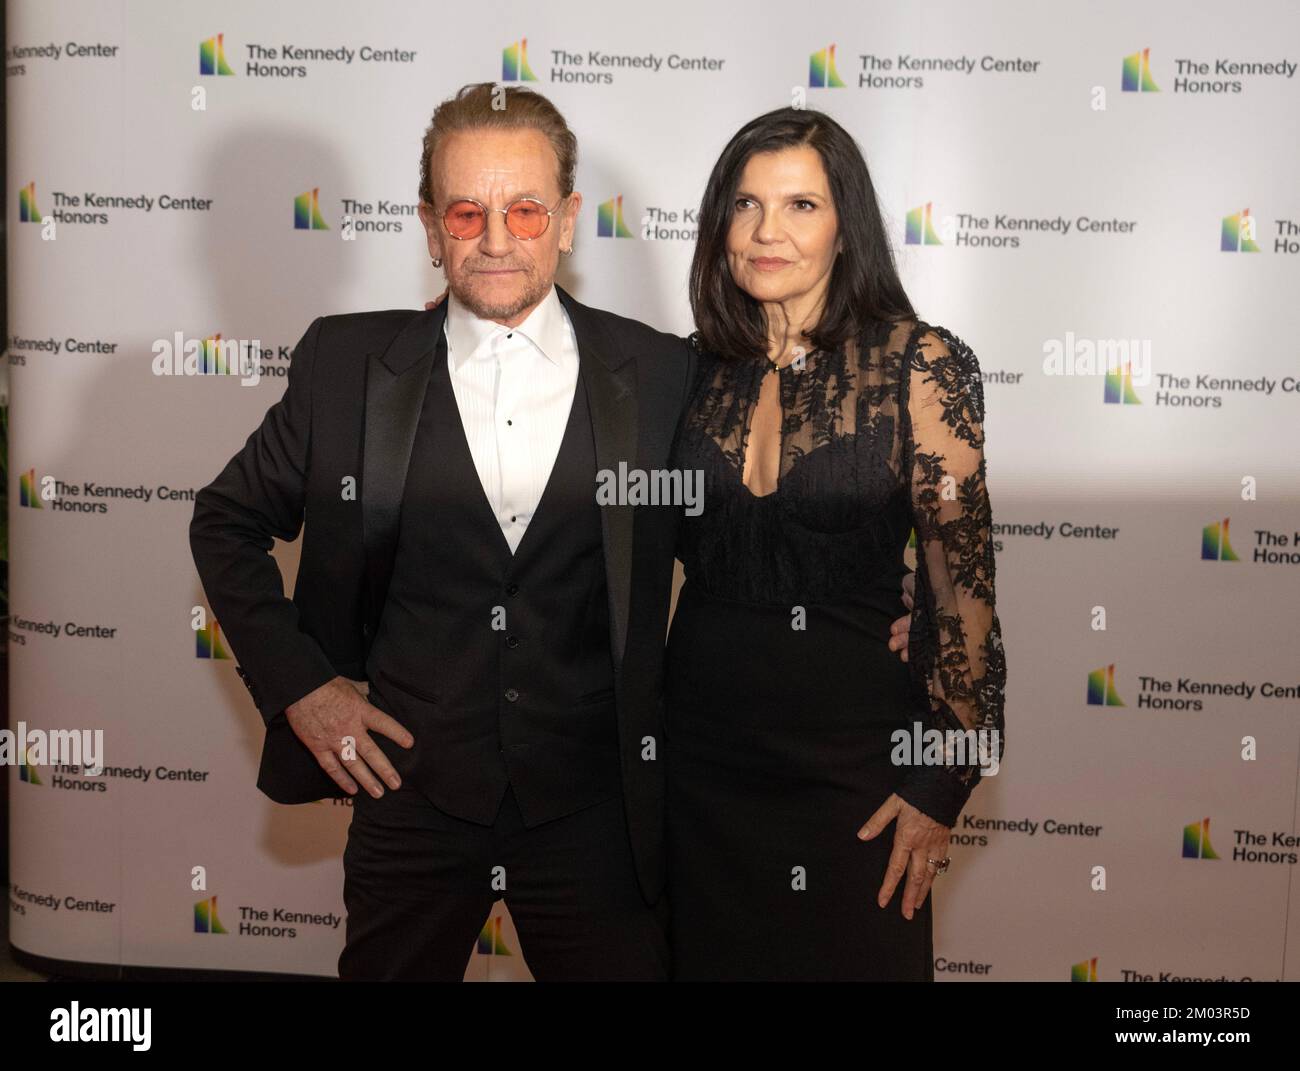 Washington DC, USA. 03rd Dec, 2022. Bono and his wife, Ali Hewson, arrive for the formal Artist's Dinner honoring the recipients of the 45th Annual Kennedy Center Honors at the Department of State in Washington, DC on Saturday, December 3, 2022. The 2022 honorees are: actor and filmmaker George Clooney; contemporary Christian and pop singer-songwriter Amy Grant; legendary singer of soul, Gospel, R&B, and pop Gladys Knight; Cuban-born American composer, conductor, and educator Tania León; and iconic Irish rock band U2, comprised of band members Bono, The Edge, Adam Clayton, and Larry Mullen Jr. Stock Photo